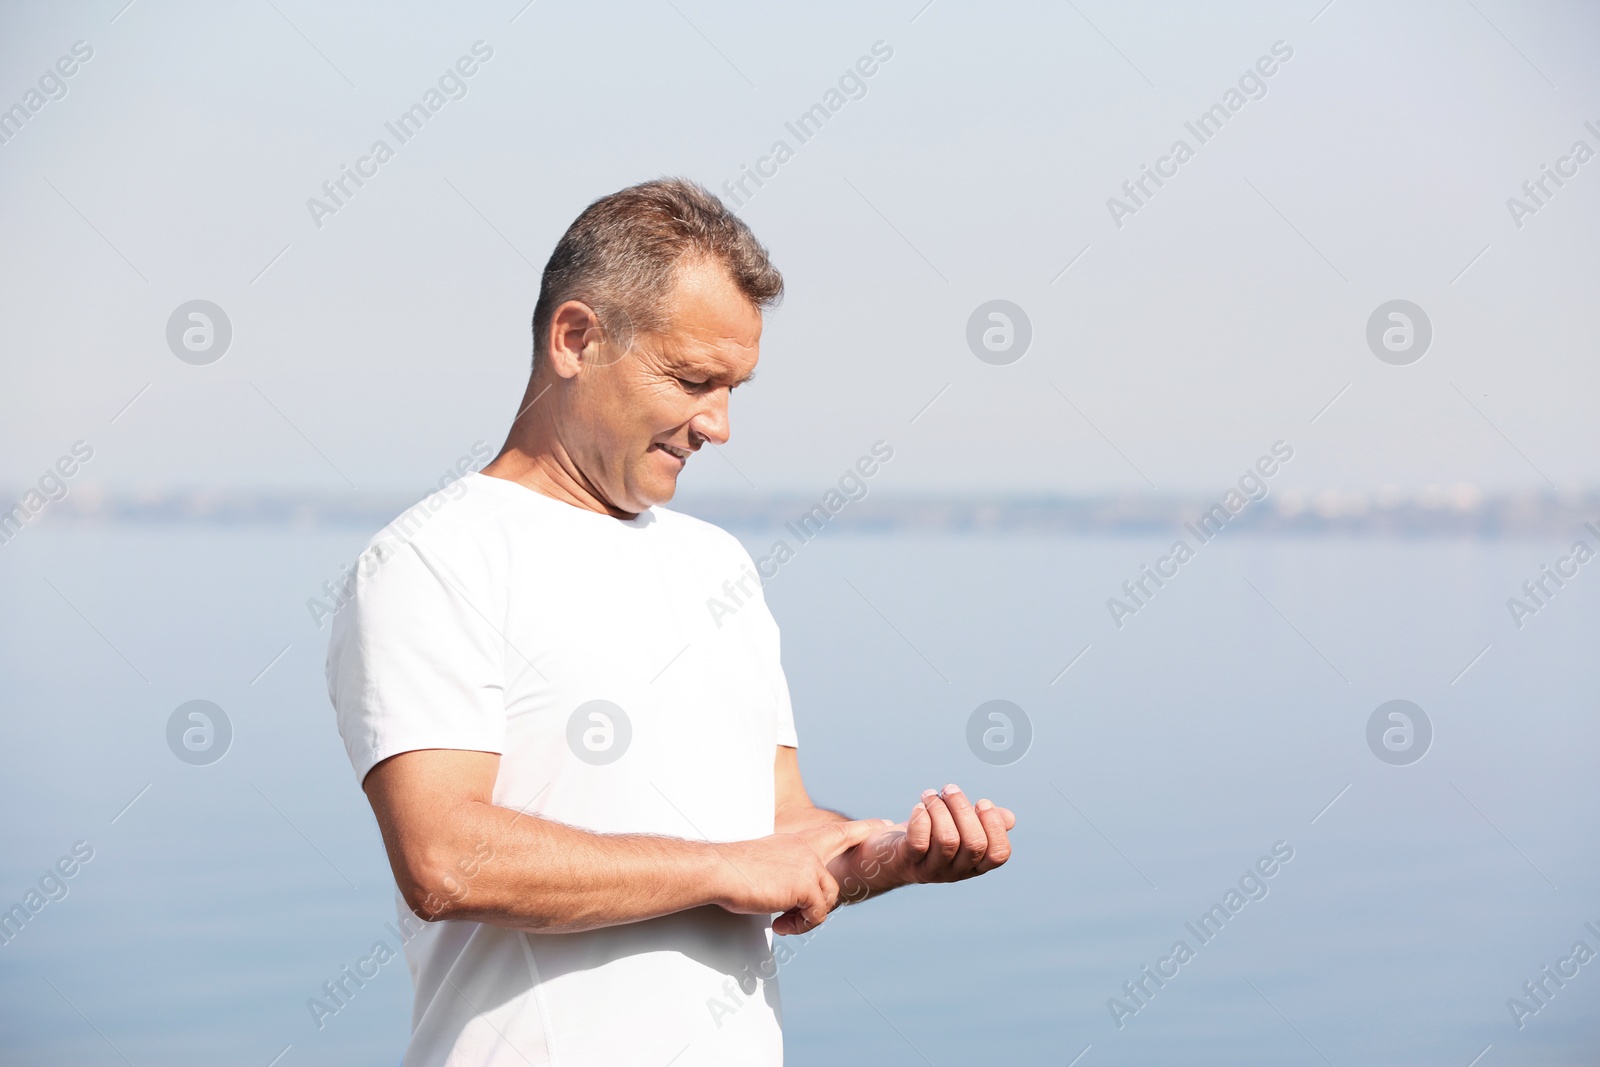 Photo of Man checking pulse outdoors on sunny day